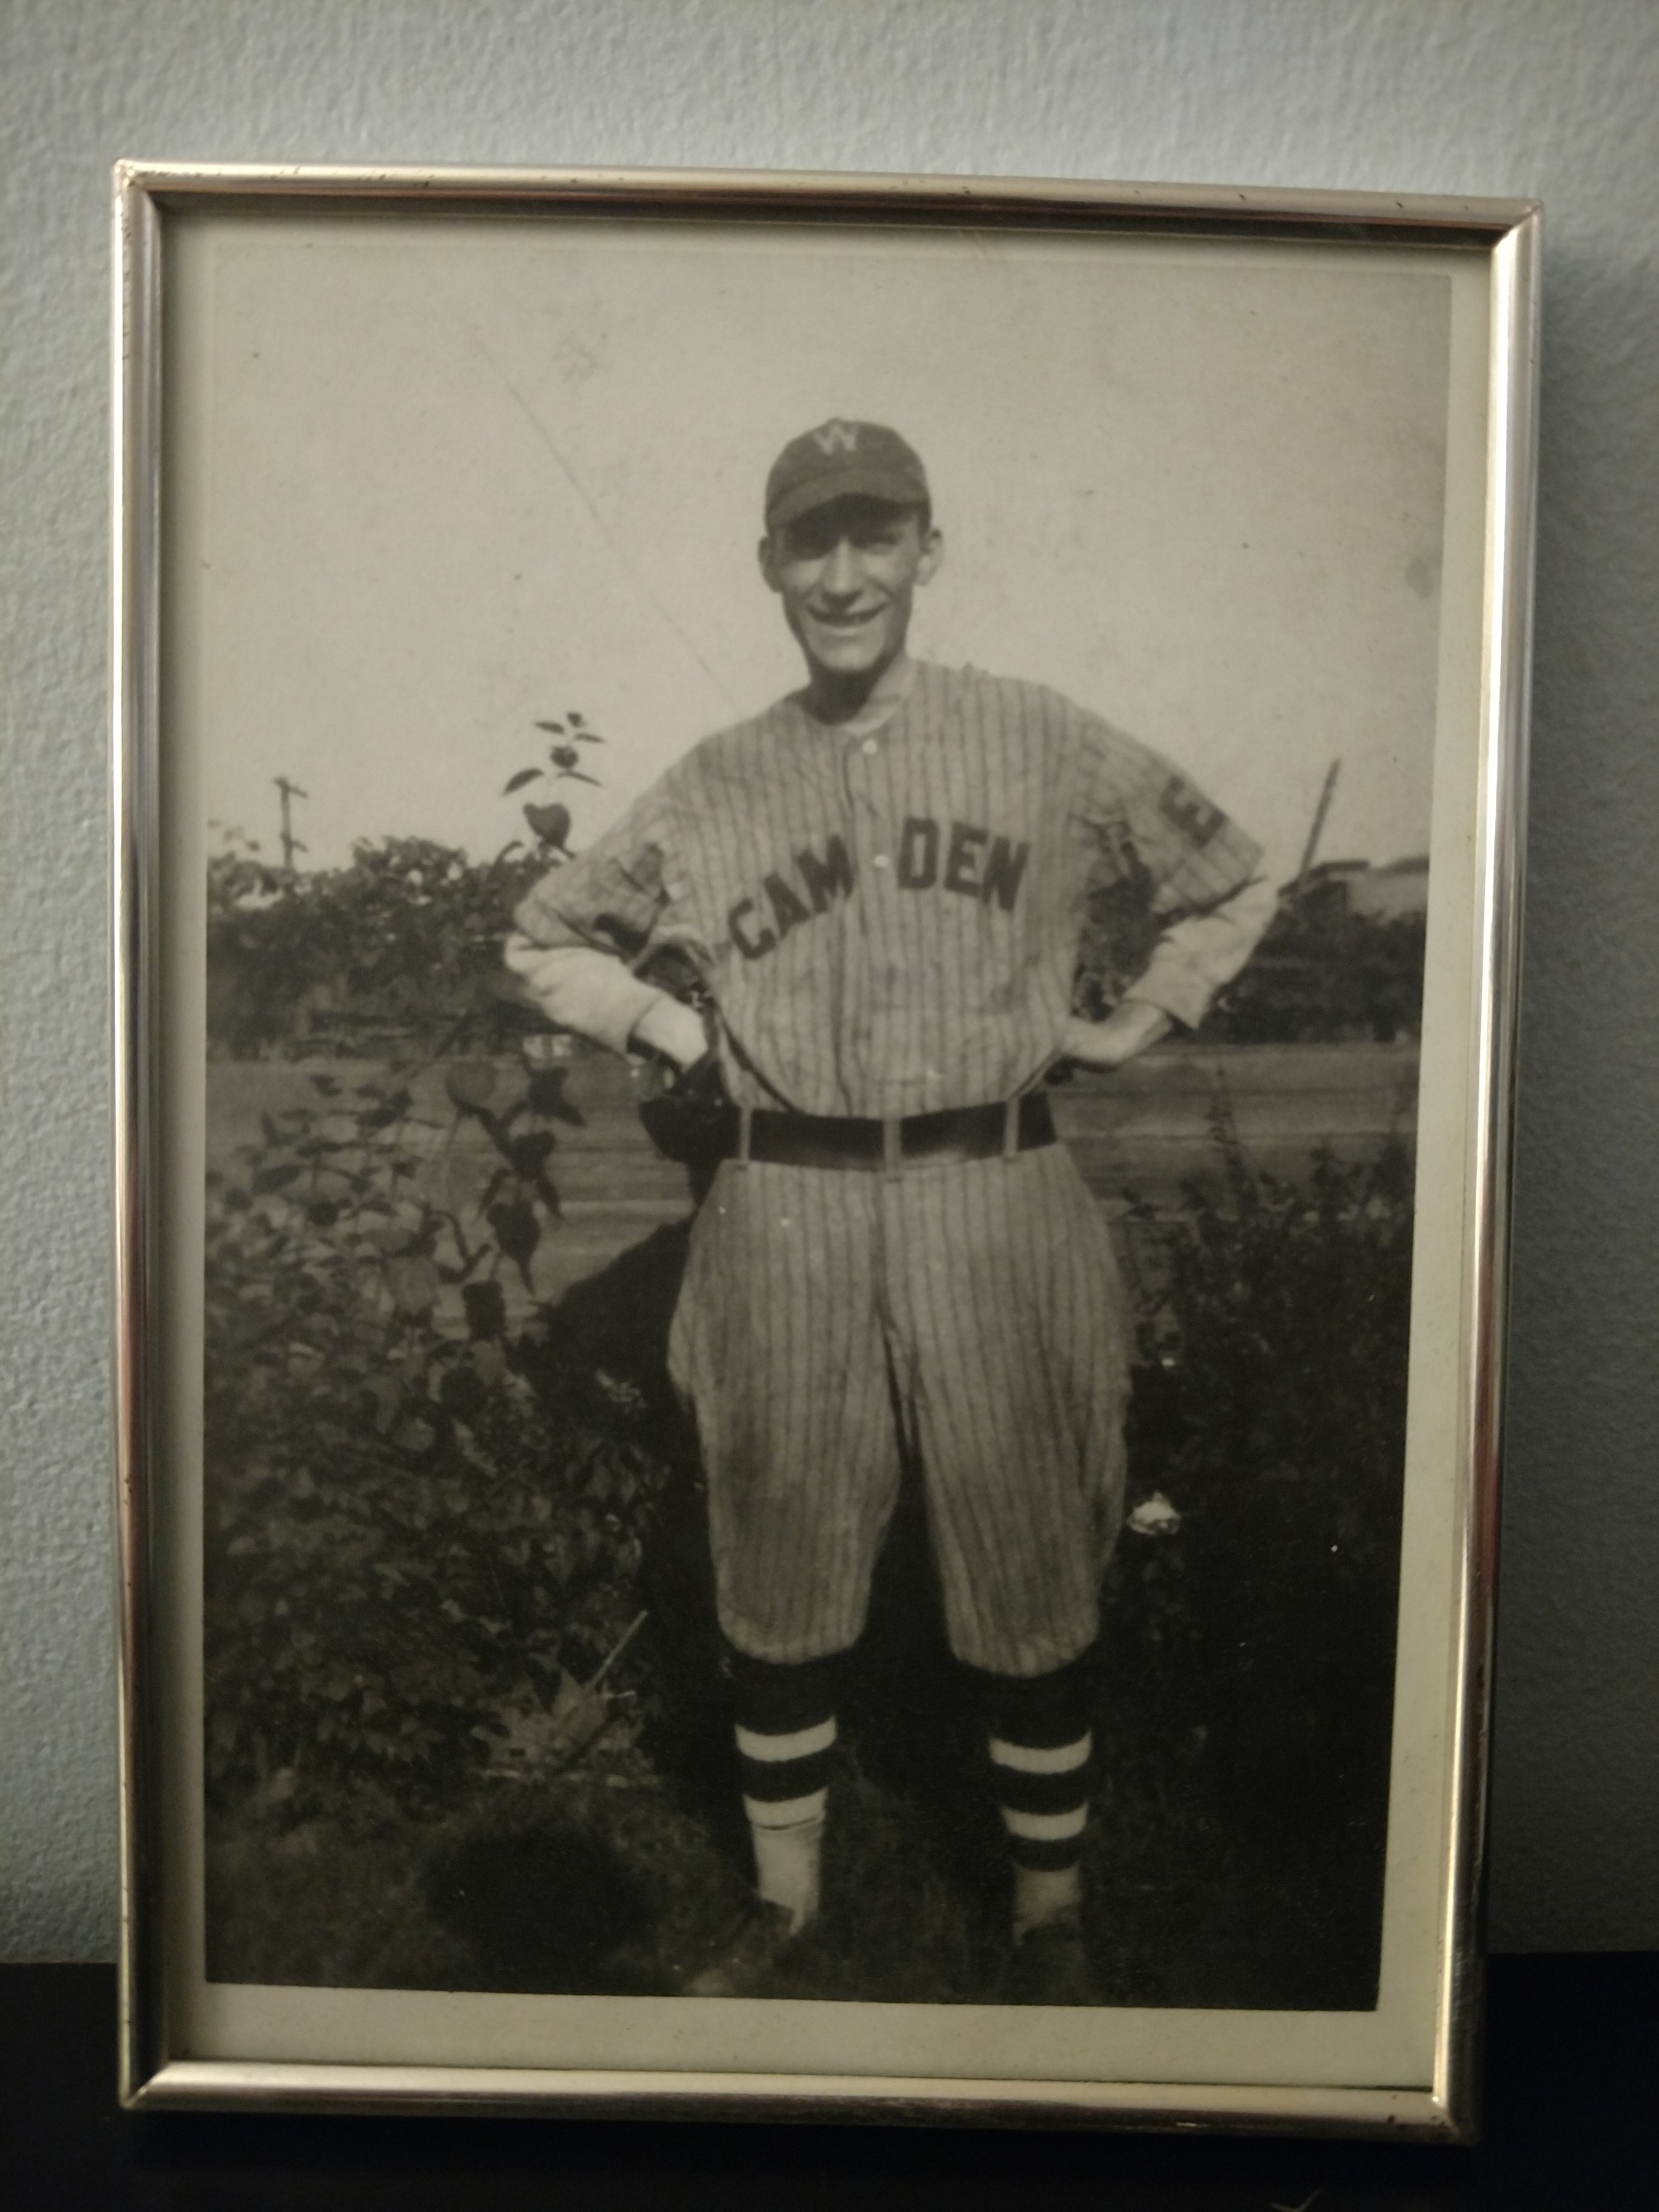 Looking for information on this old baseball player